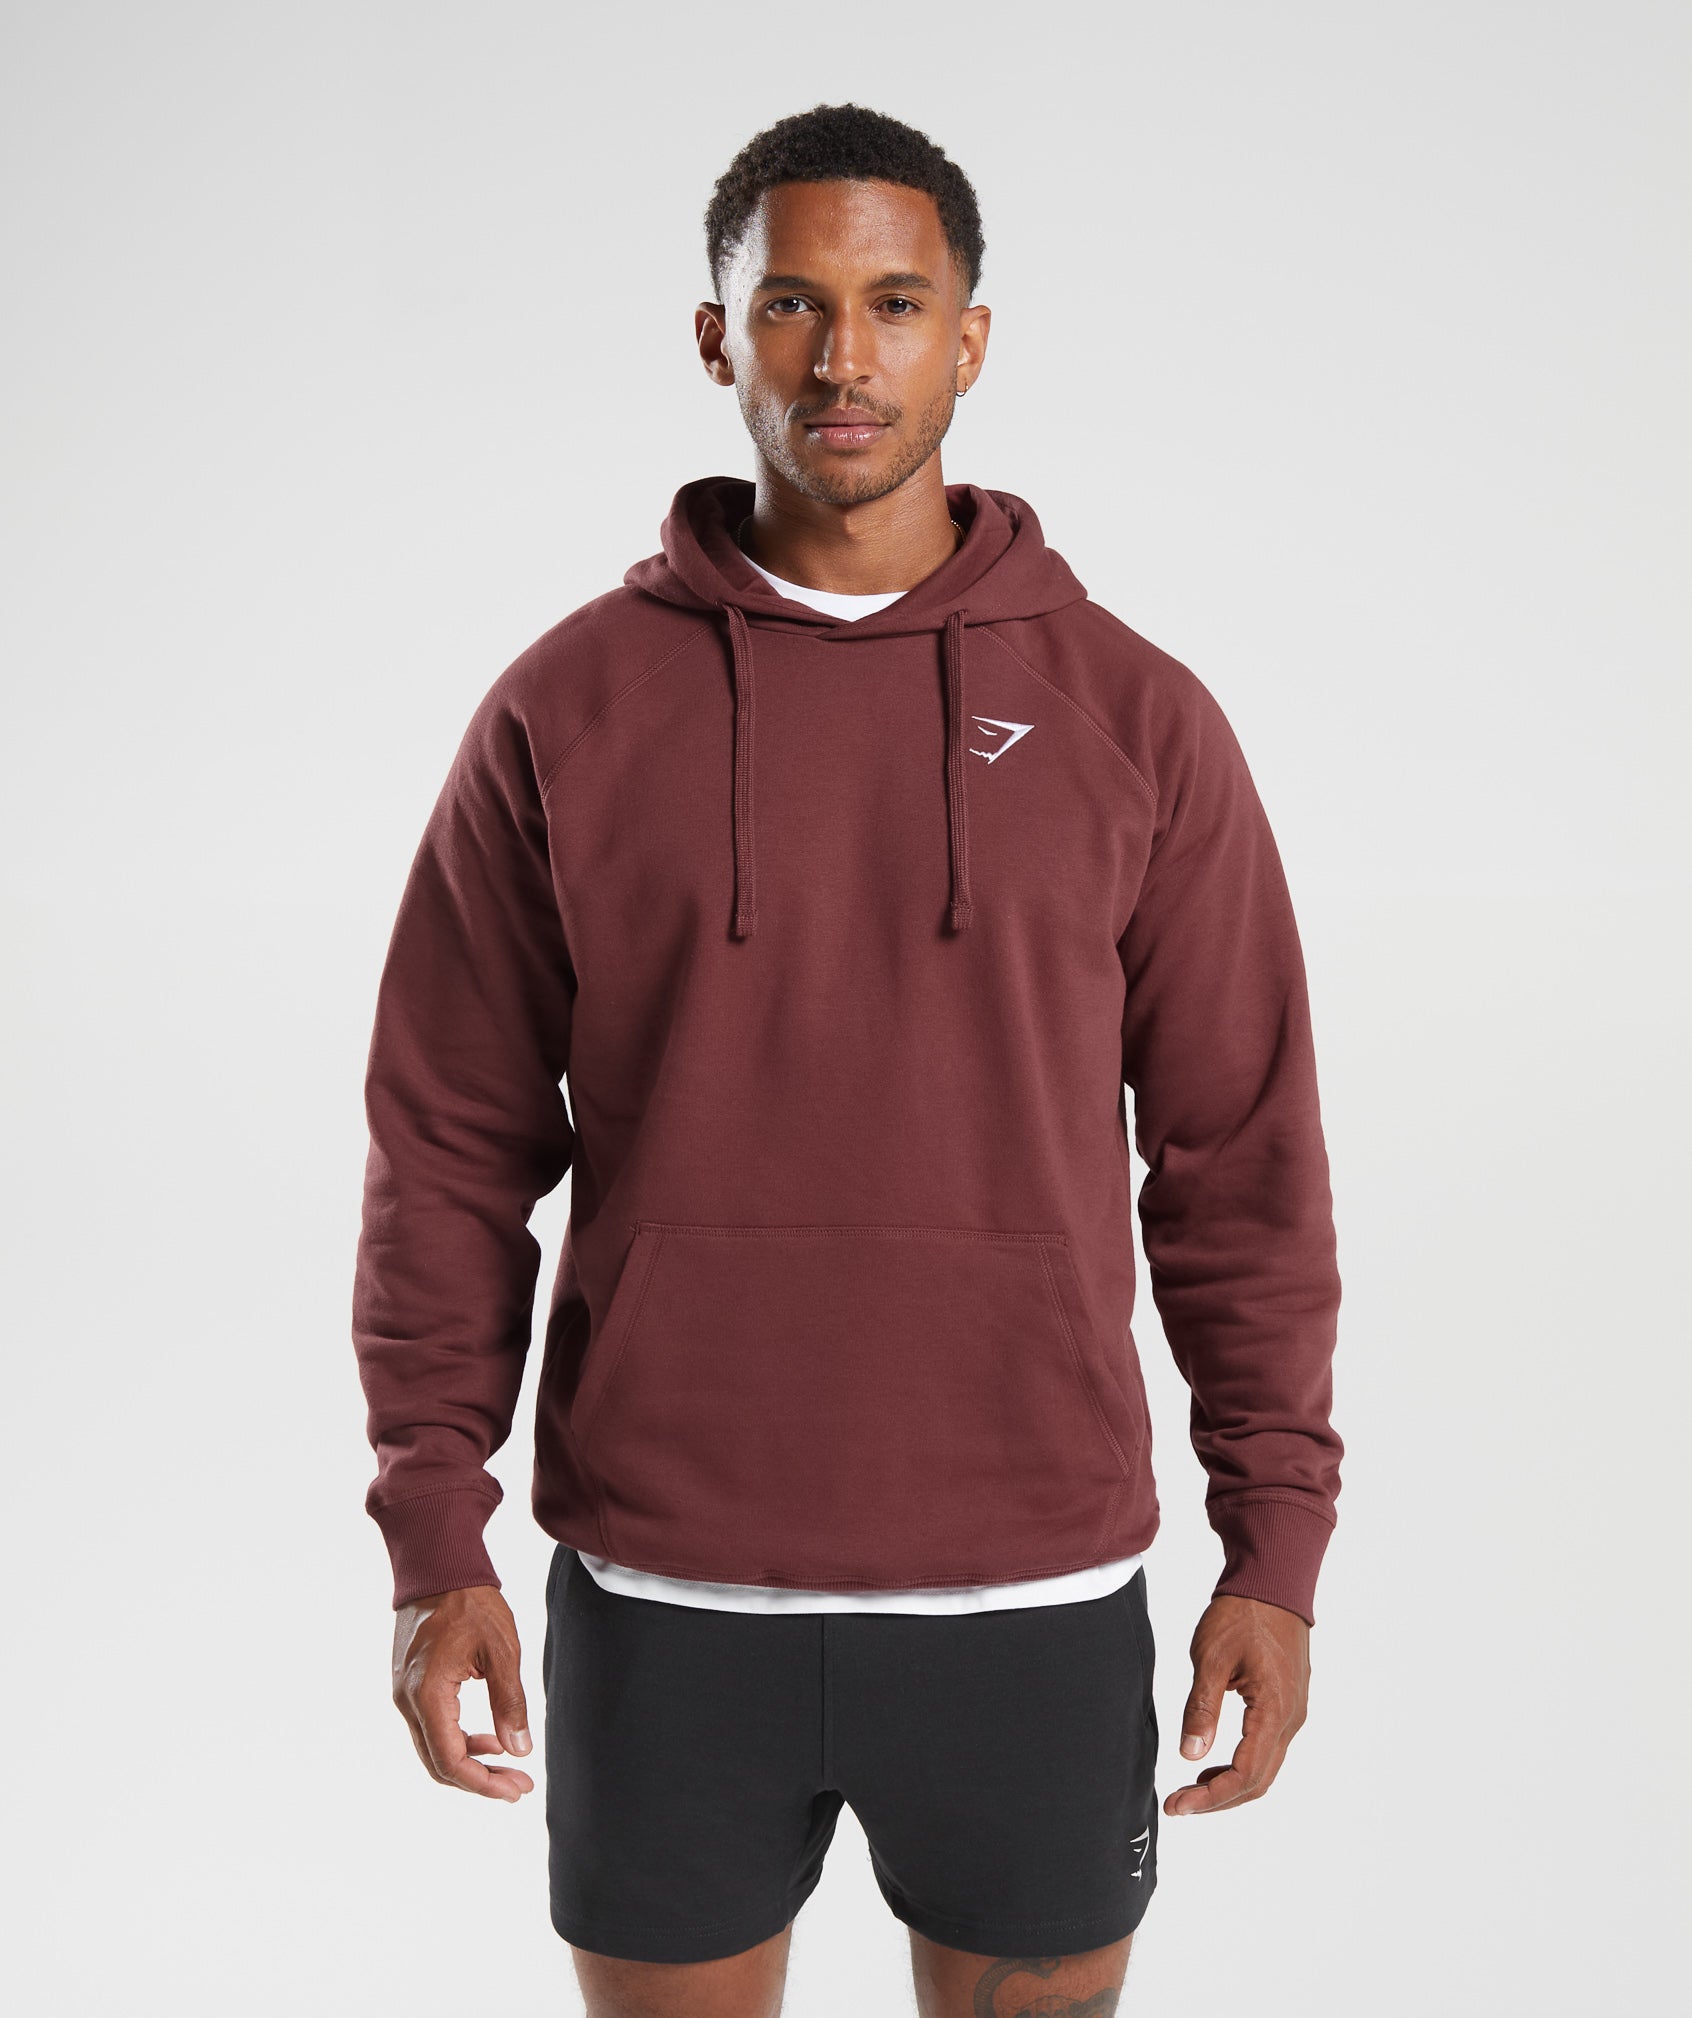 Crest Hoodie in Washed Burgundy - view 1